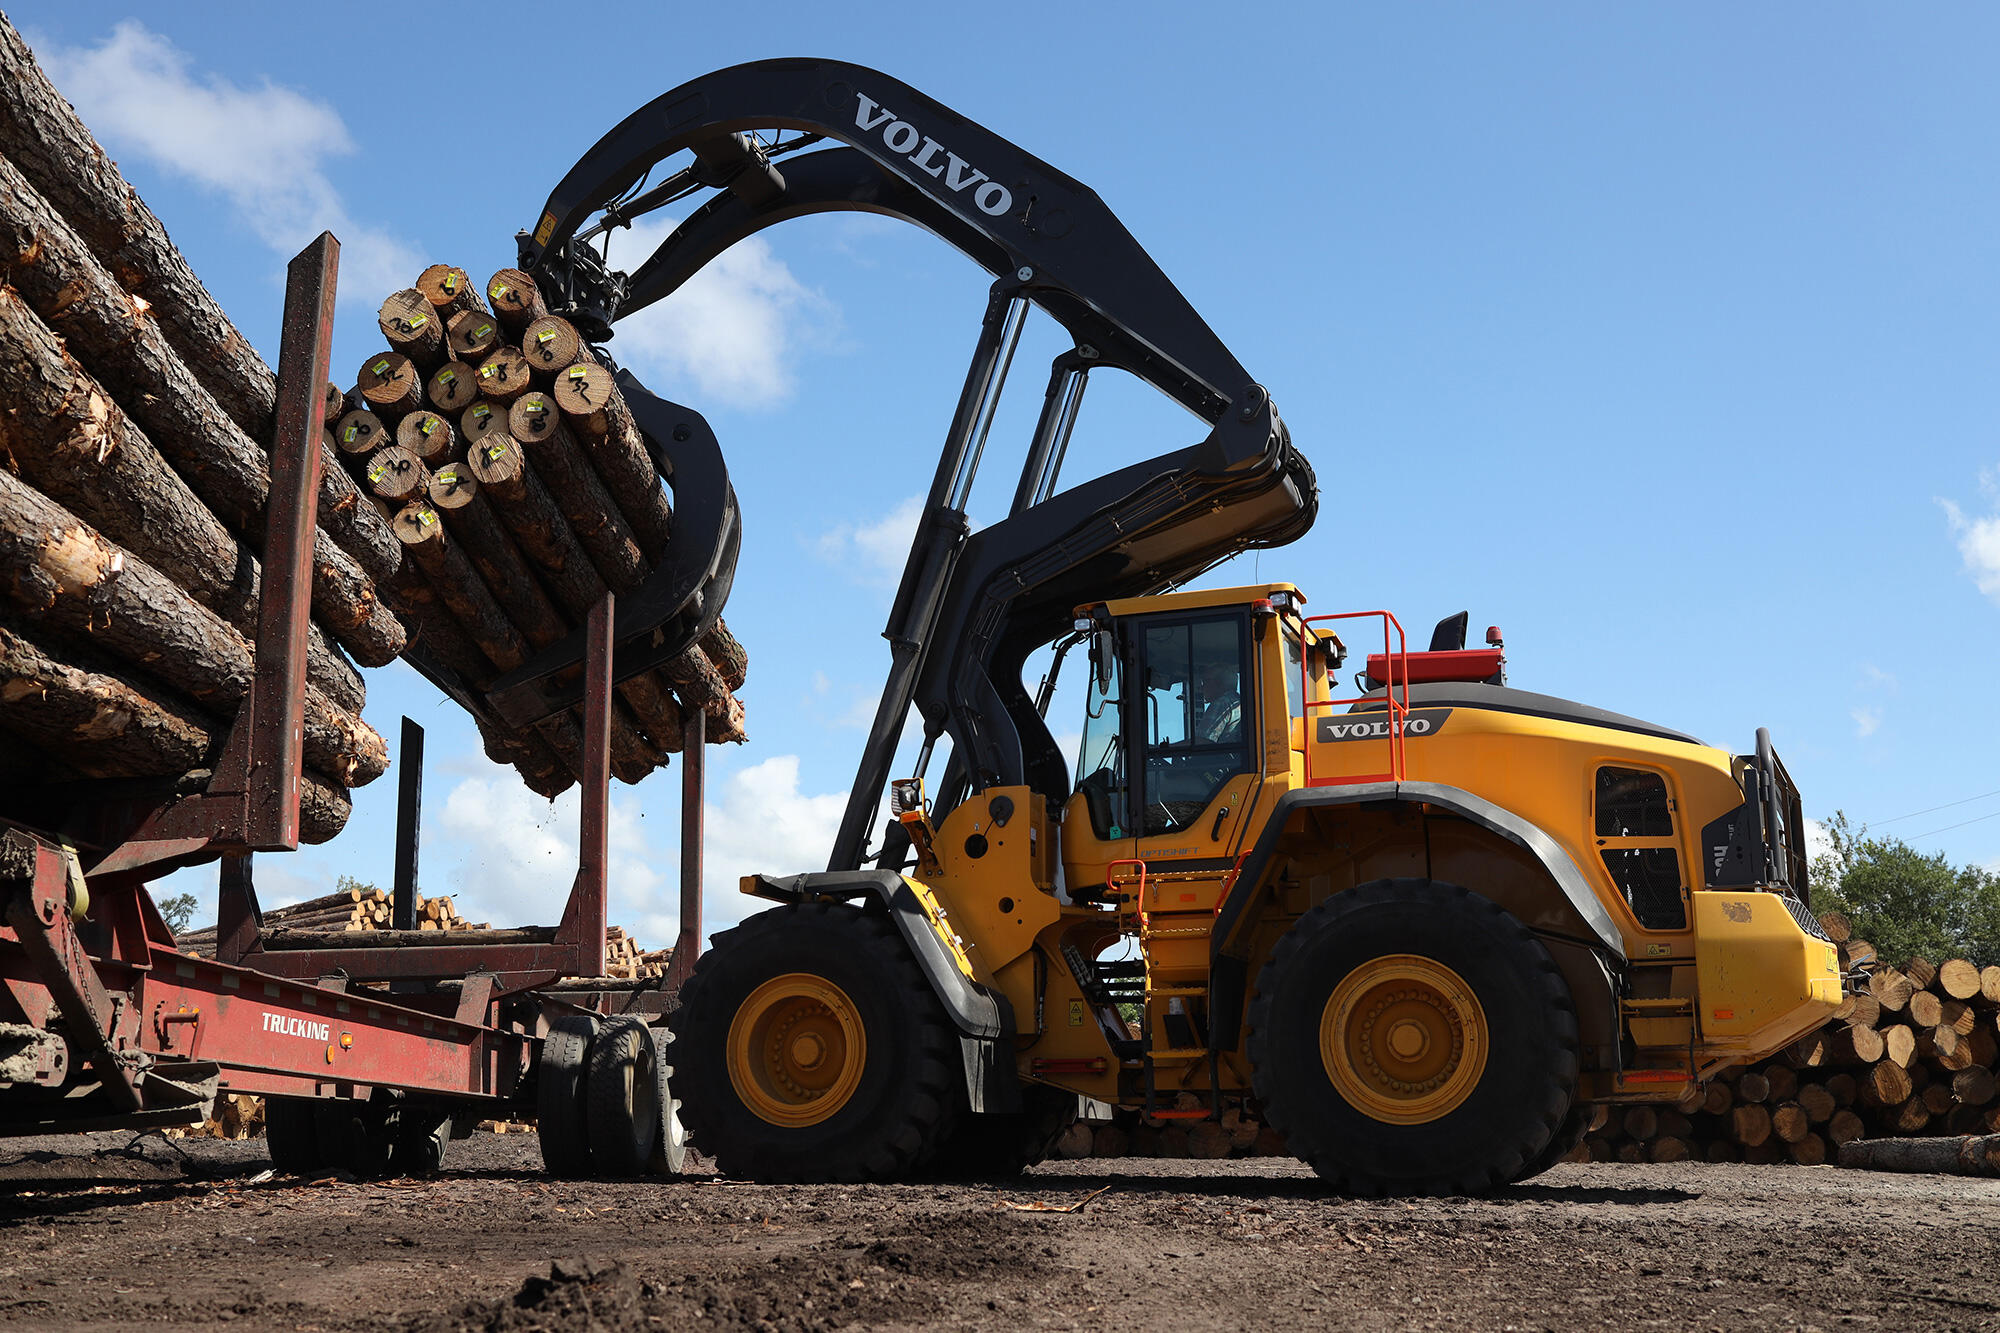 Working with Austrian and German loggers, owner Carl Pfaff knew the capabilities the Volvo L180H high lift would add to his North Carolina operations.